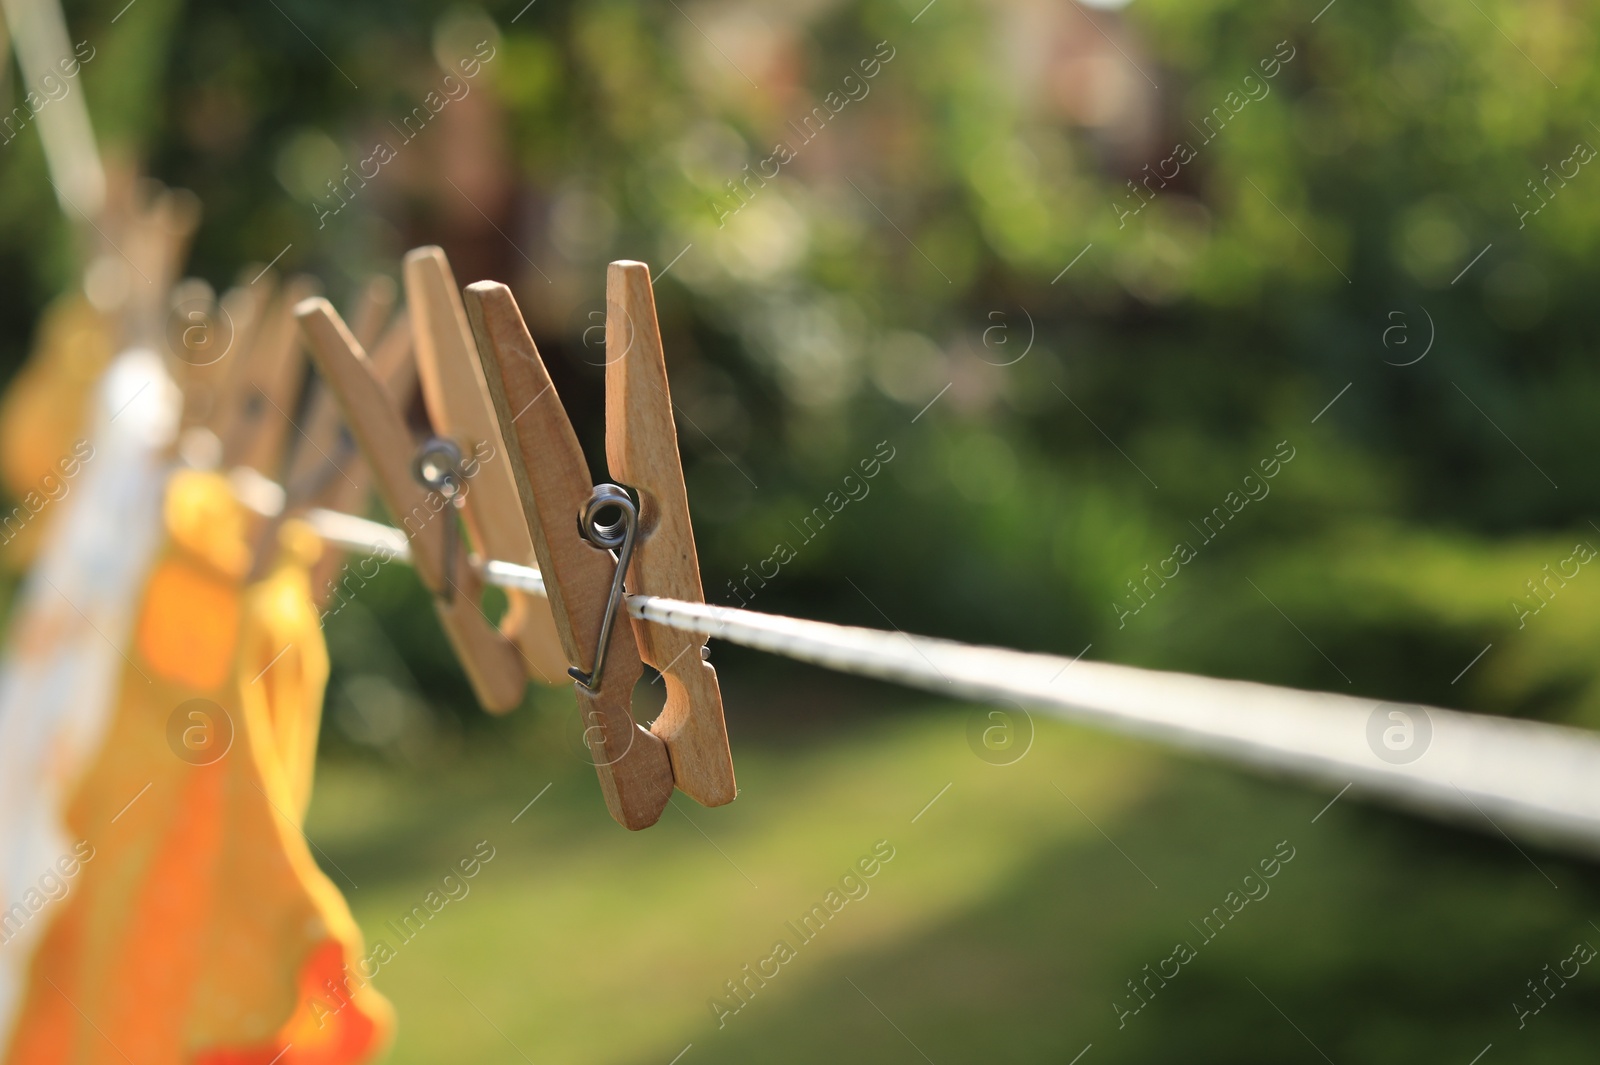 Photo of Clean clothes drying outdoors during sunny day, focus on laundry line with wooden clothespins